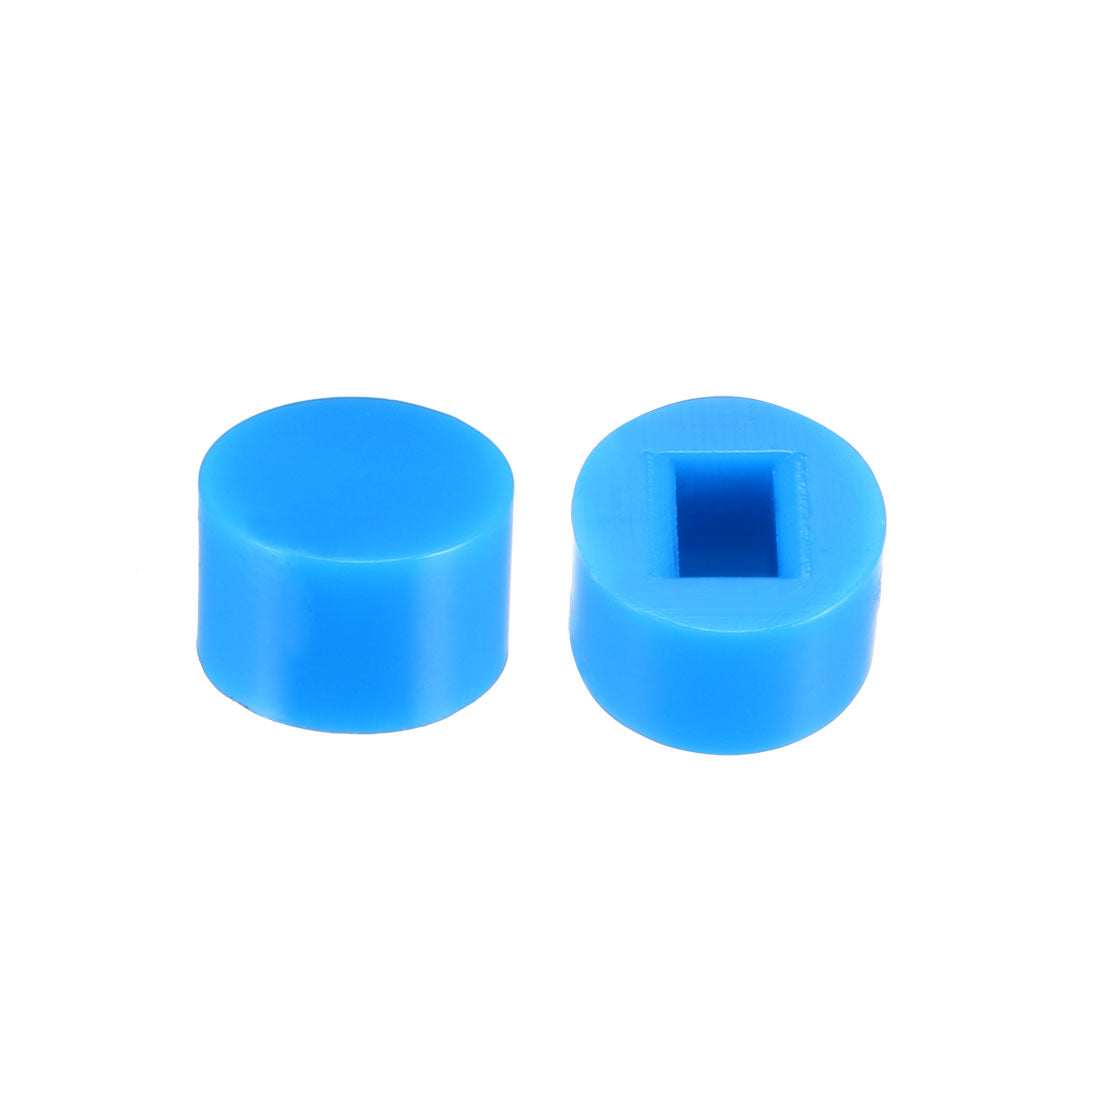 uxcell Uxcell 40Pcs Plastic 6x3.7mm Pushbutton Switch Caps Cover Keycaps Protector for 5.8x5.8 Latching Tactile Switch Blue